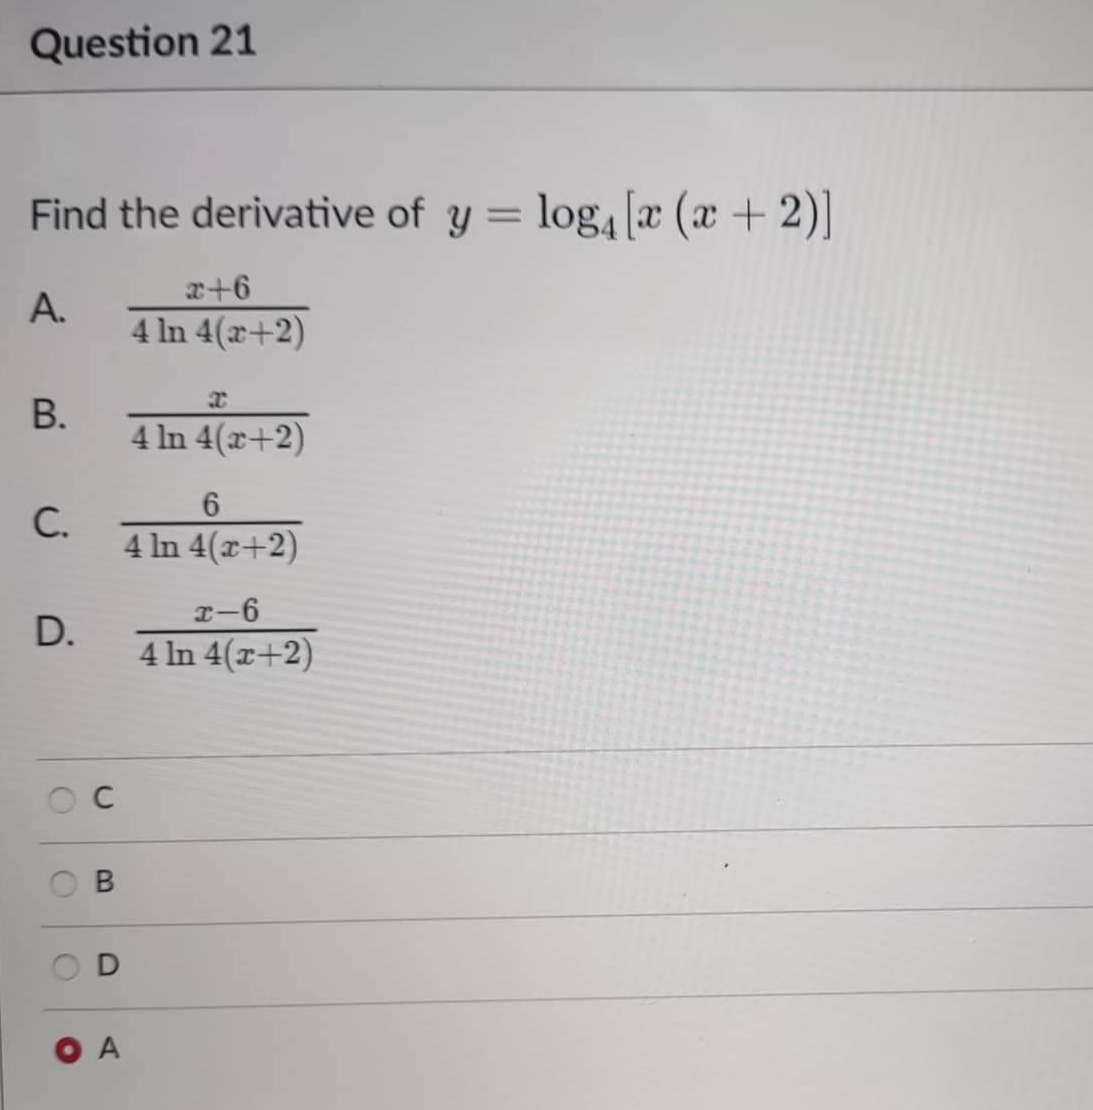 Question 21
Find the derivative of y = log₁ [x (x + 2)]
A.
x+6
4 ln 4(x+2)
B.
4 ln 4(x+2)
6
4 ln 4(x+2)
x-6
4 In 4(x+2)
C.
D.
C
B
D
OA